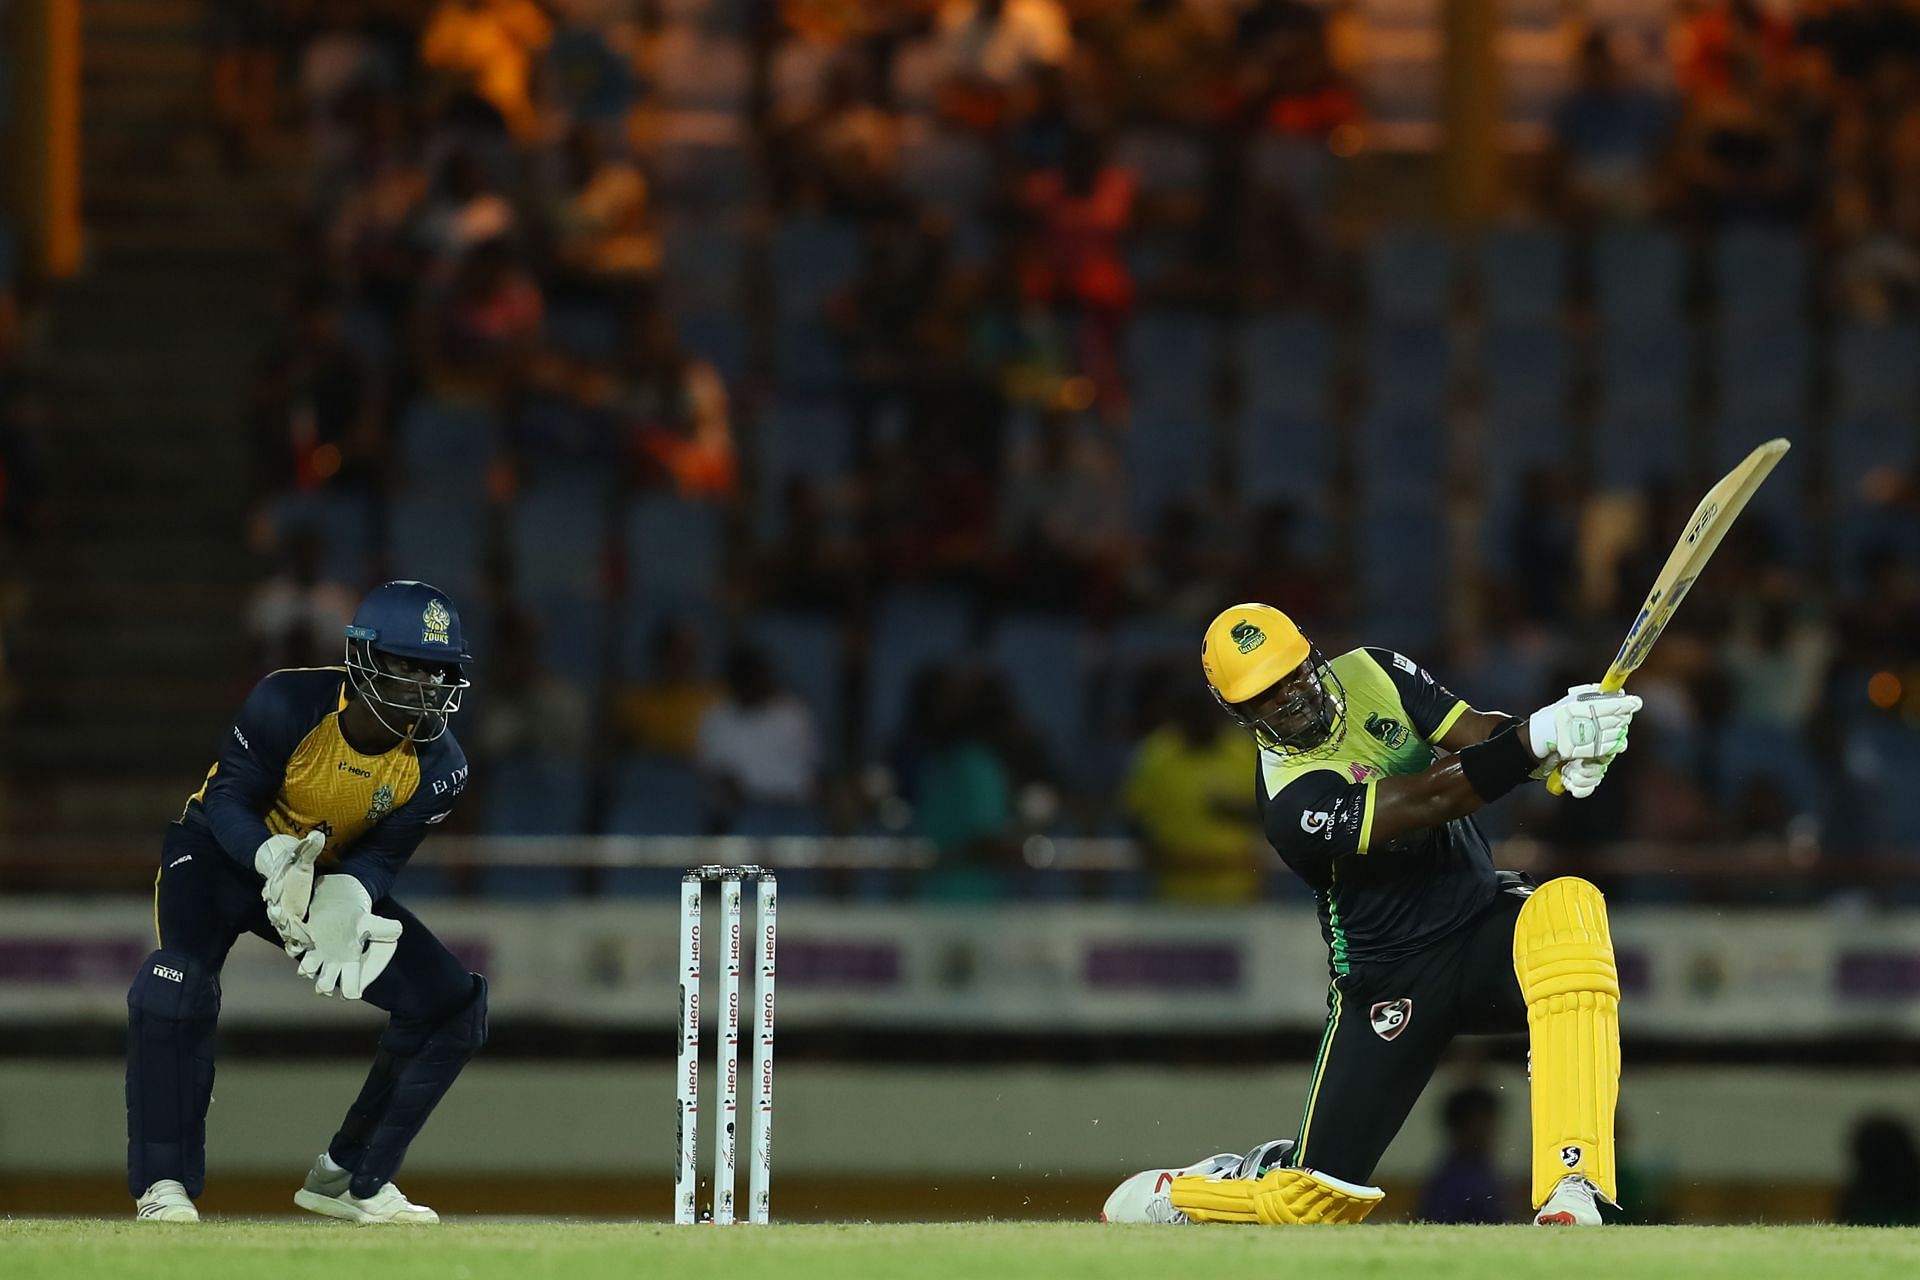 Dwayne Smith batting in the CPL. Pic: Getty Images